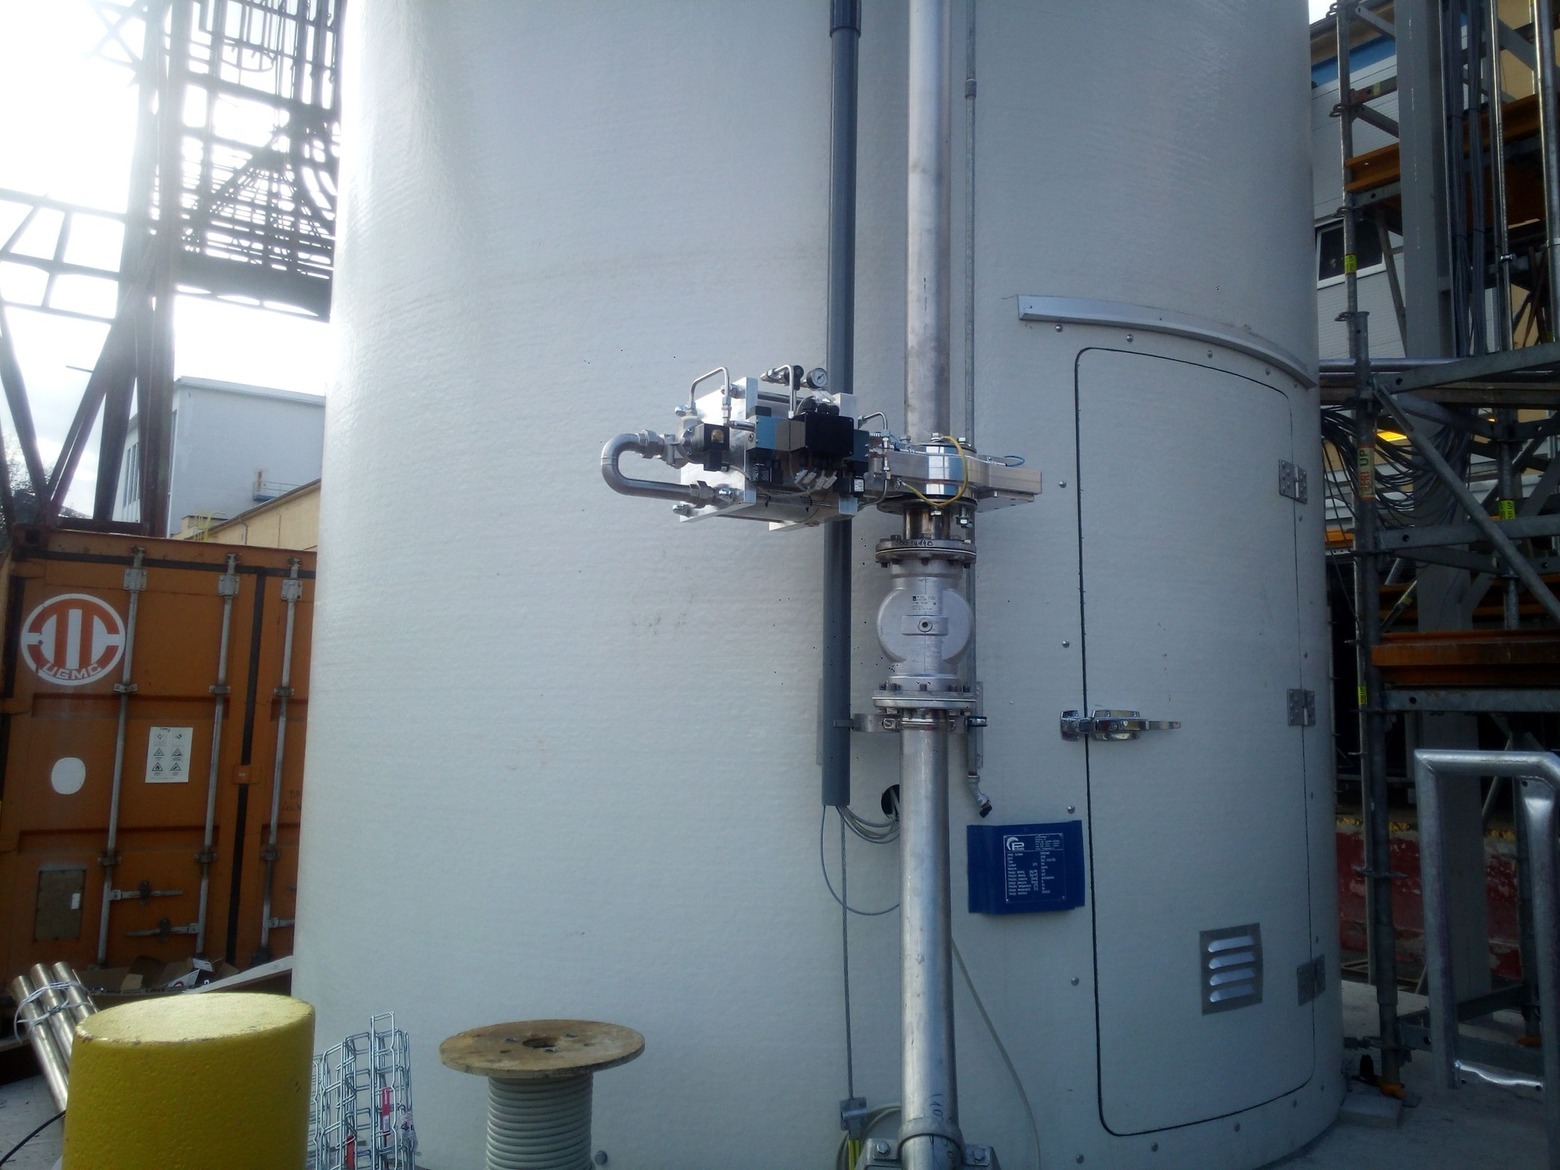 Explosion protection for pneumatic conveying systems